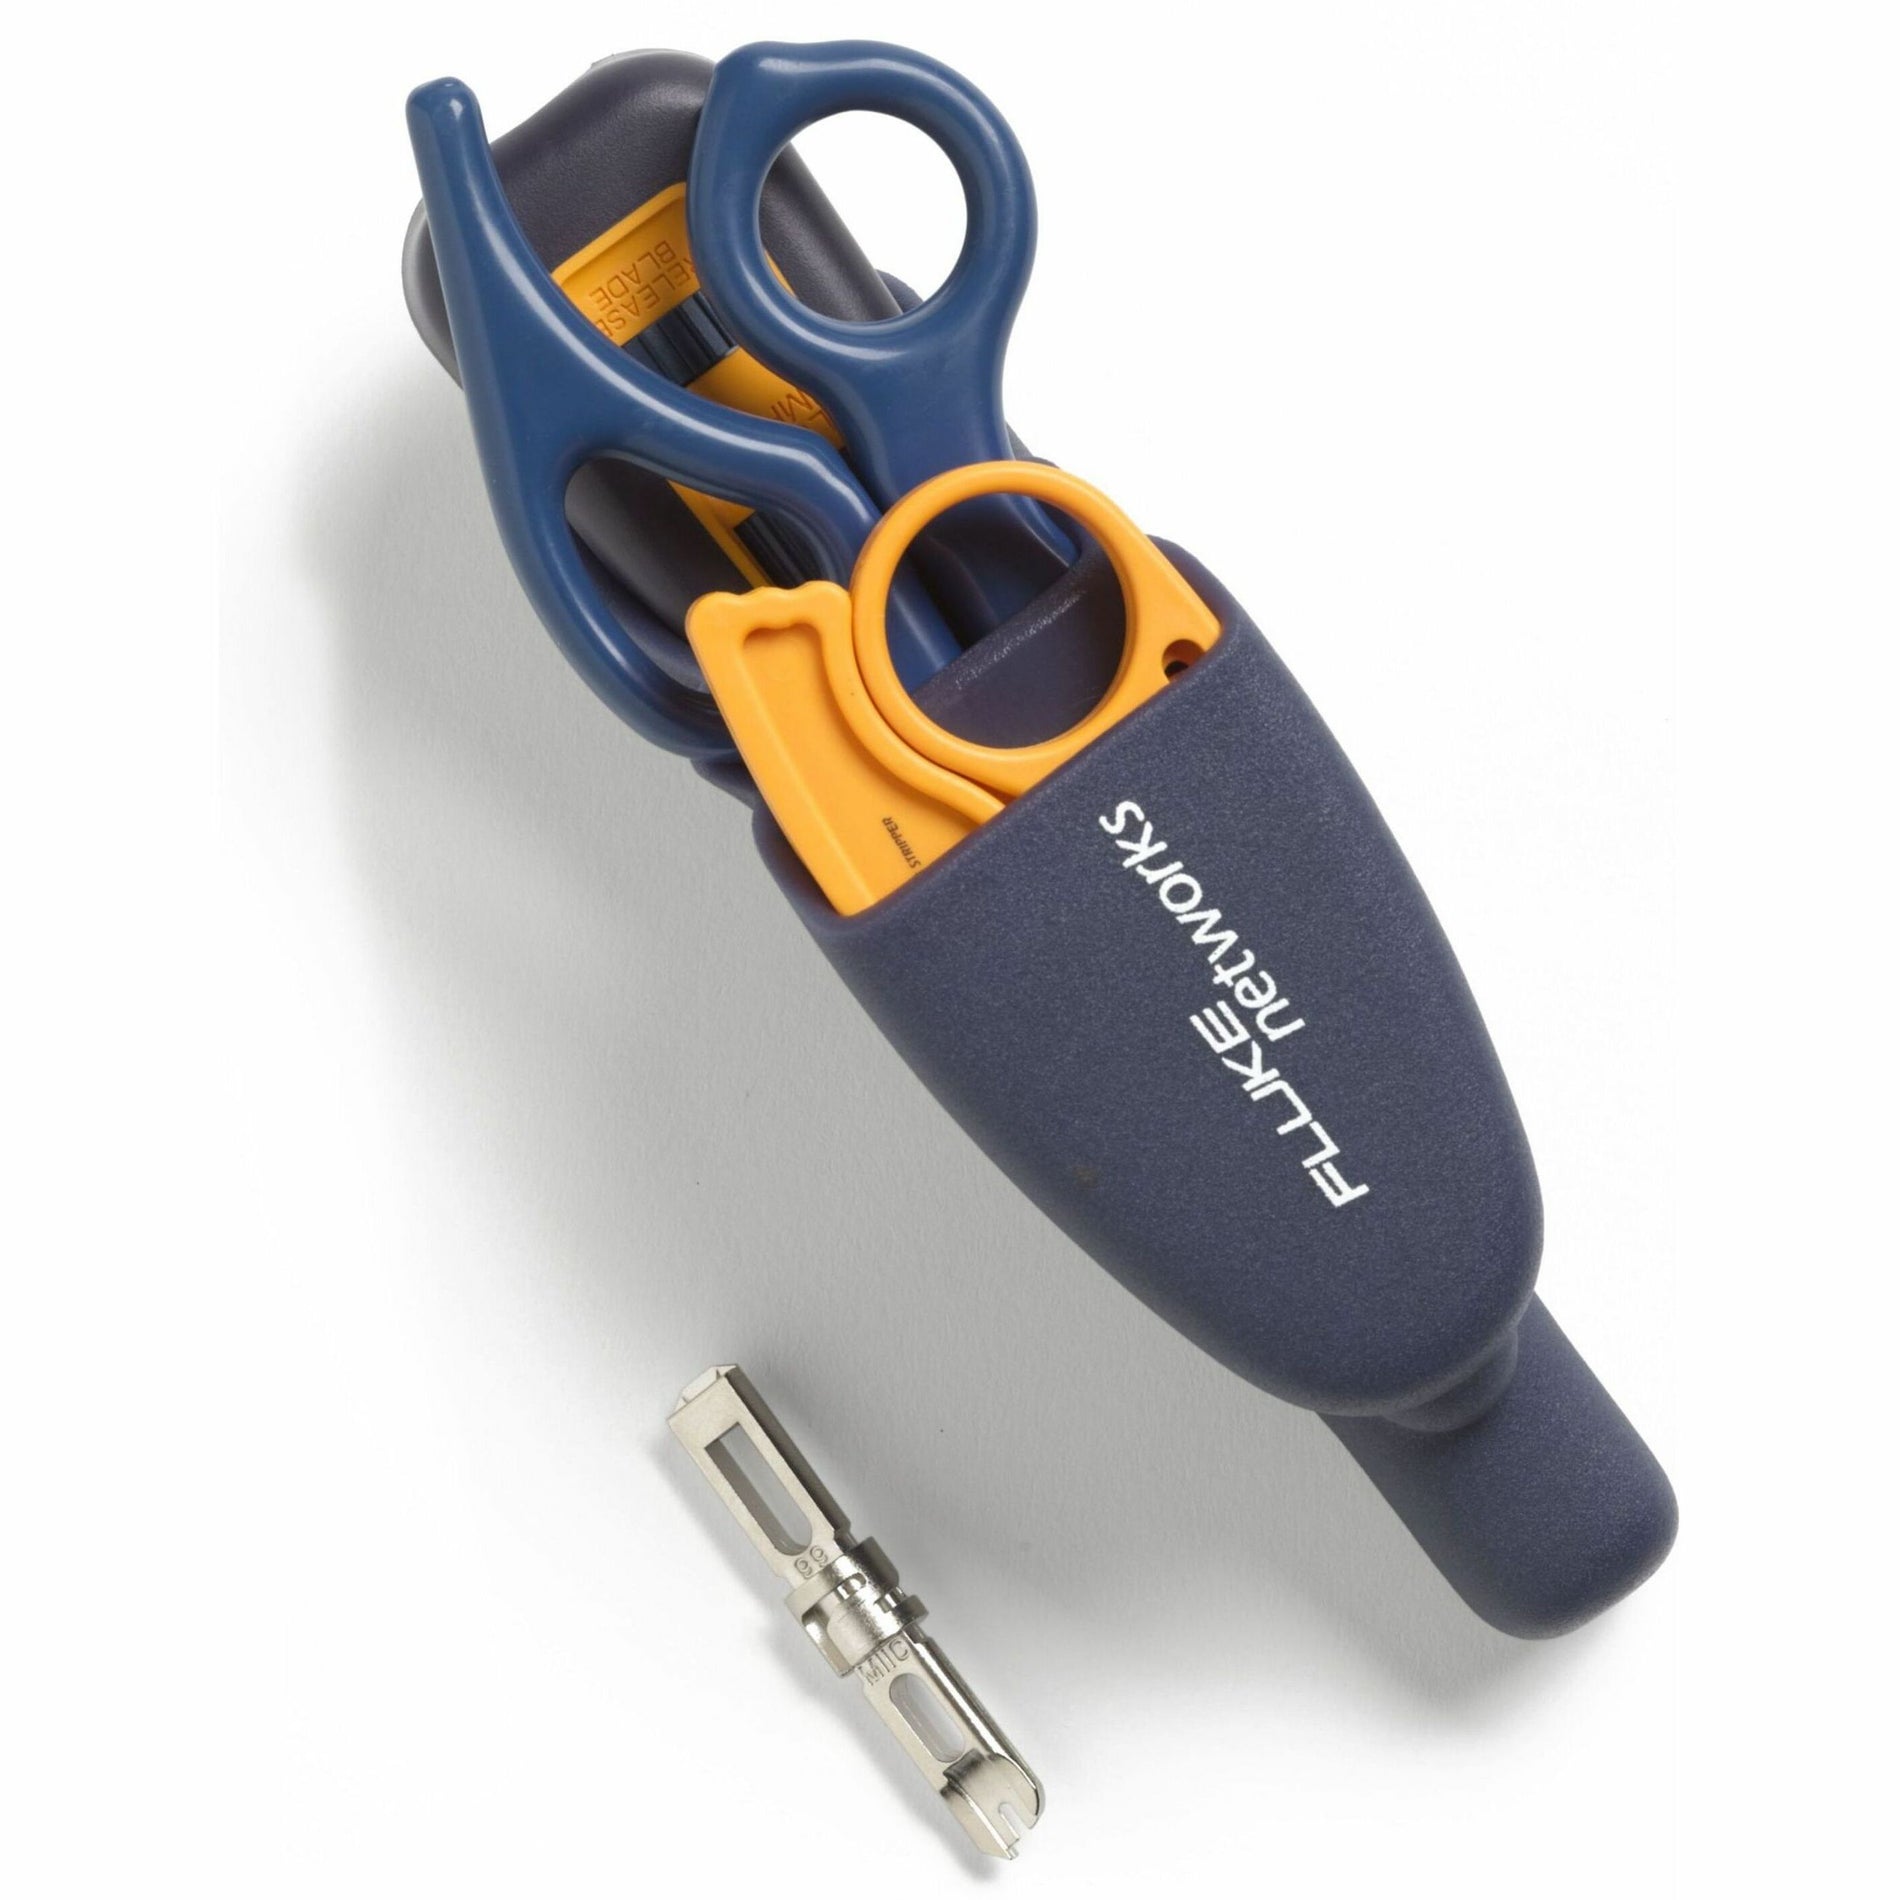 Fluke Networks 11292000 Pro-Tool Kit, Hardware Connectivity Kit with IS50 Impact Tool, D-Snips, Cable Stripper, EverSharp 66/110 cut blade